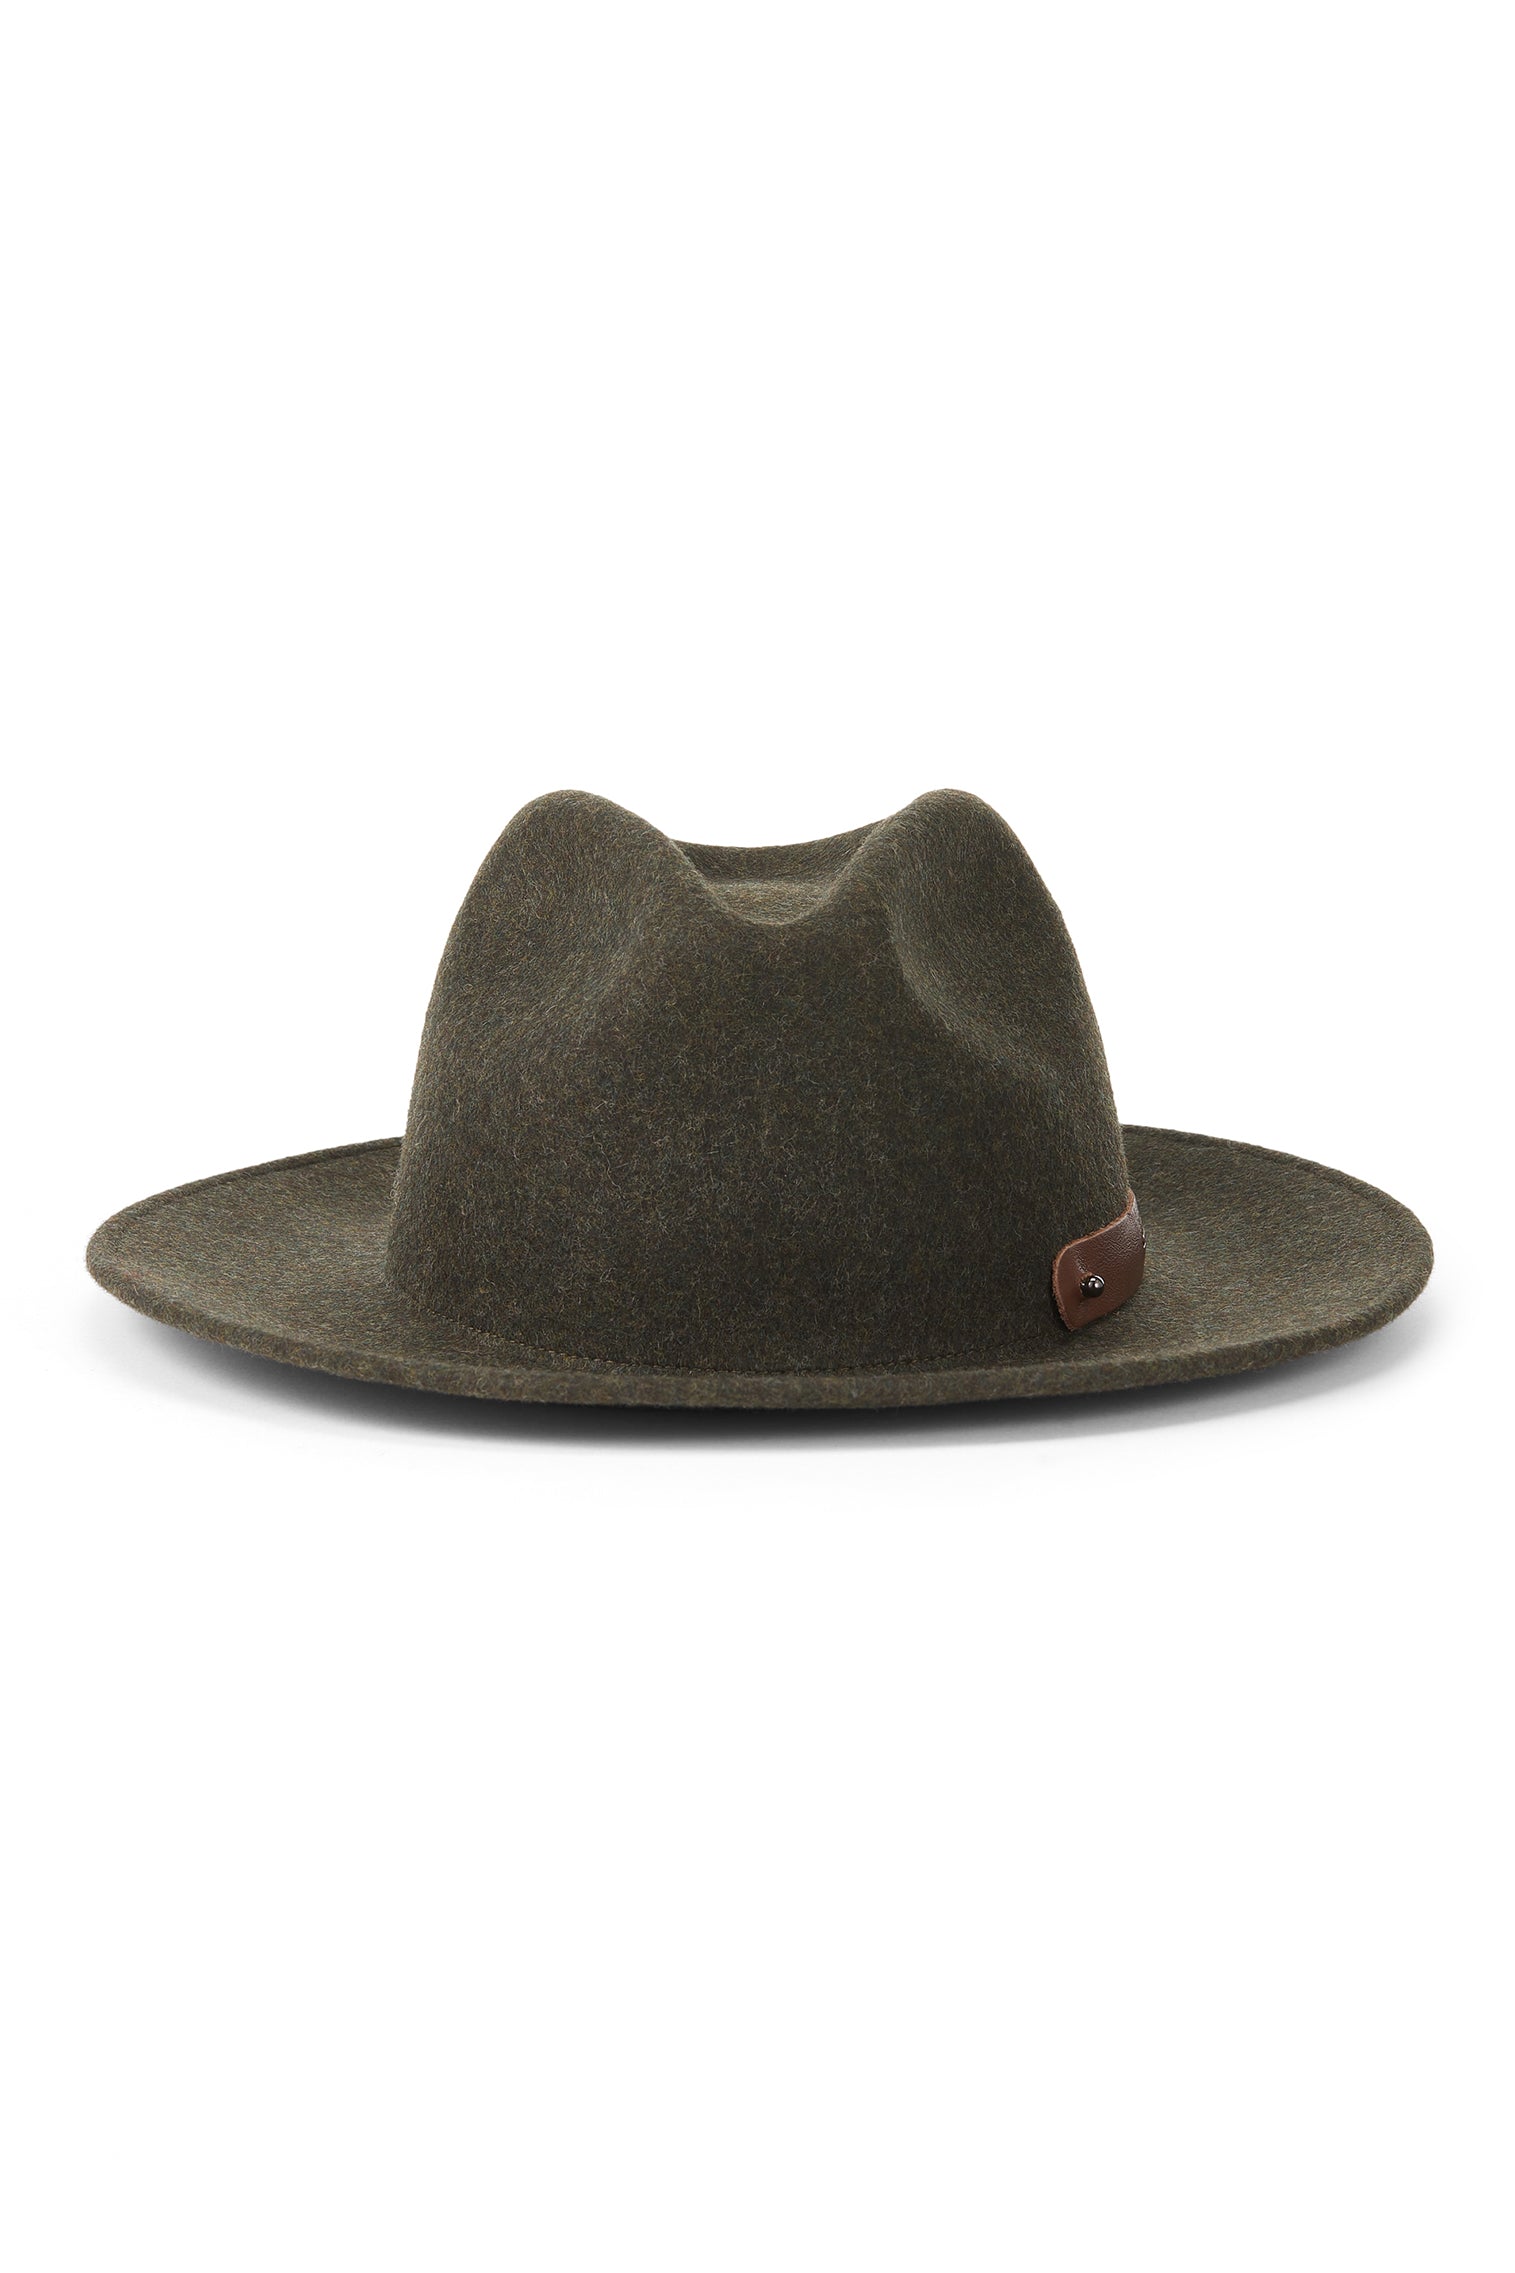 Cheltenham Rollable Trilby - Products - Lock & Co. Hatters London UK